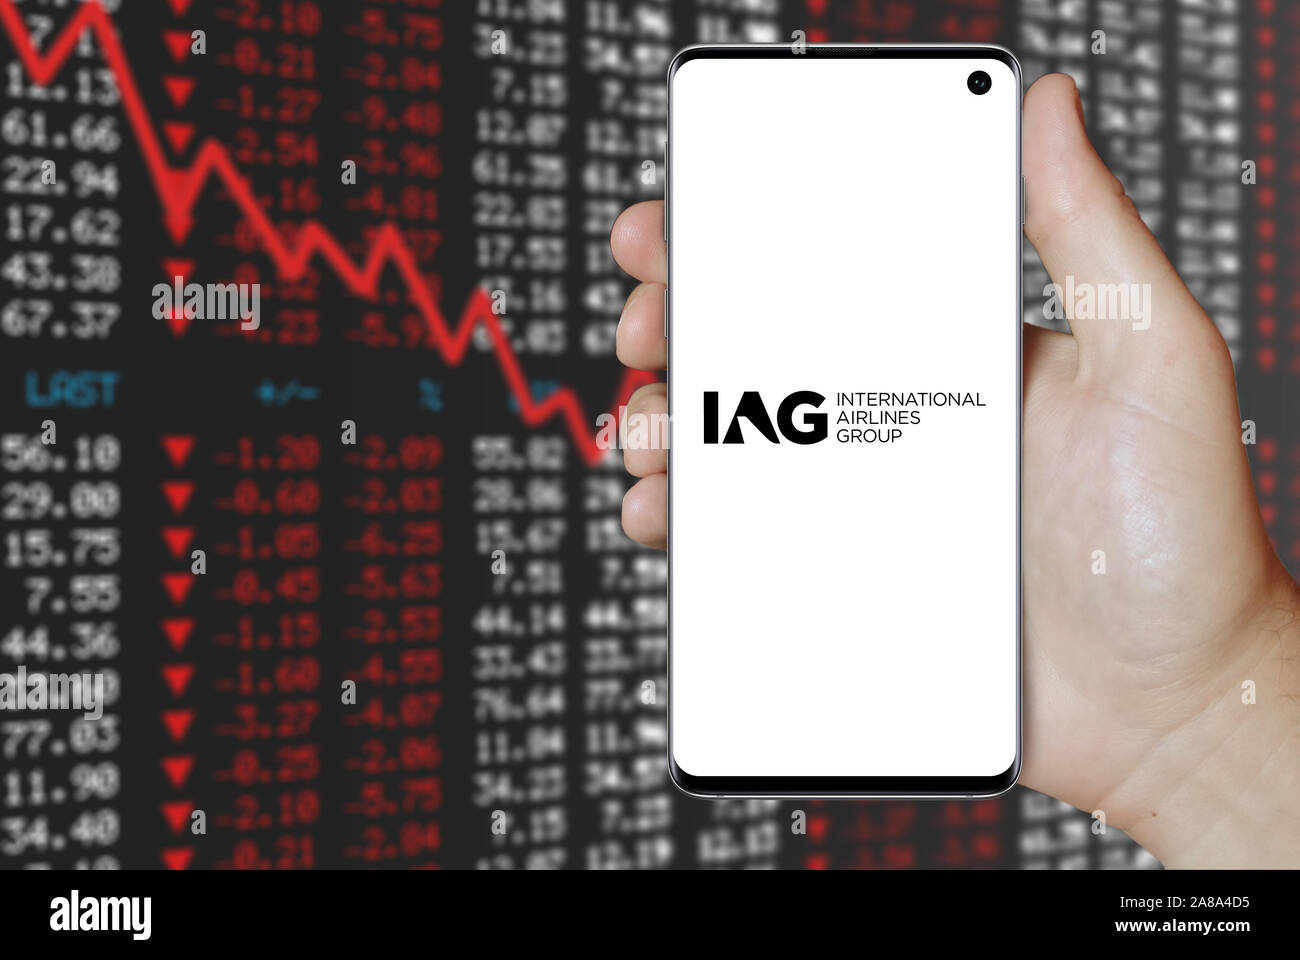 Logo of public company International Airlines Group displayed on a smartphone. Negative stock market background. Credit: PIXDUCE Stock Photo